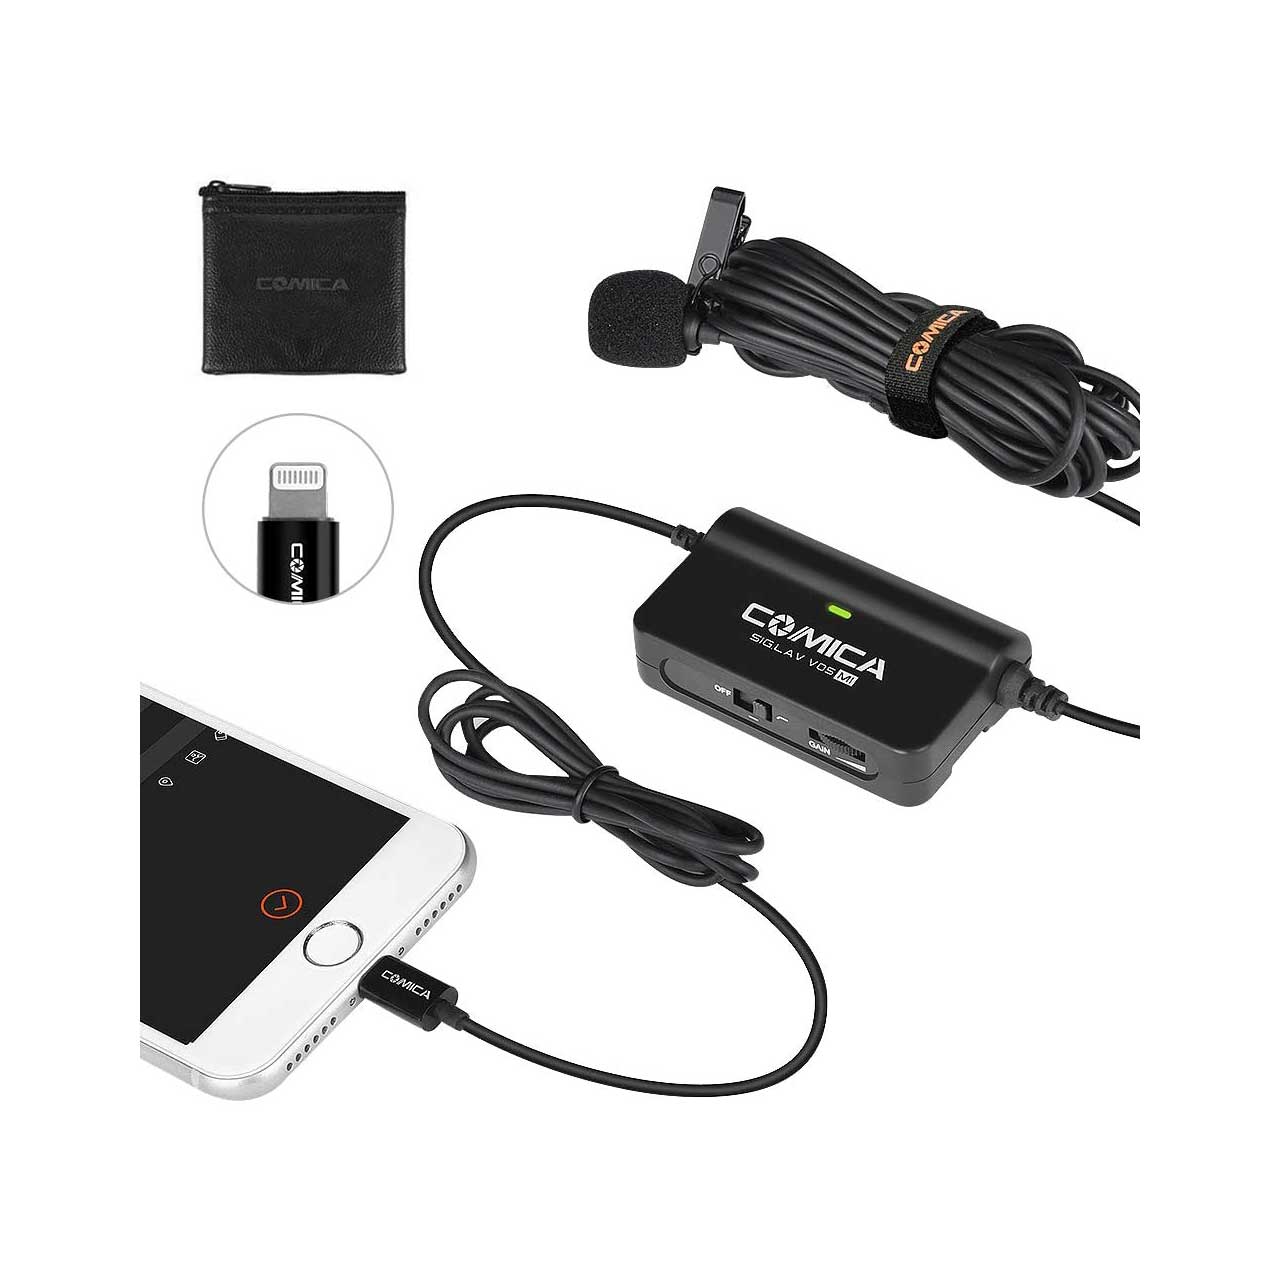 Sony ECM-44B Omnidirectional Lavalier Microphone Kit with Mic Interface for  Smartphones